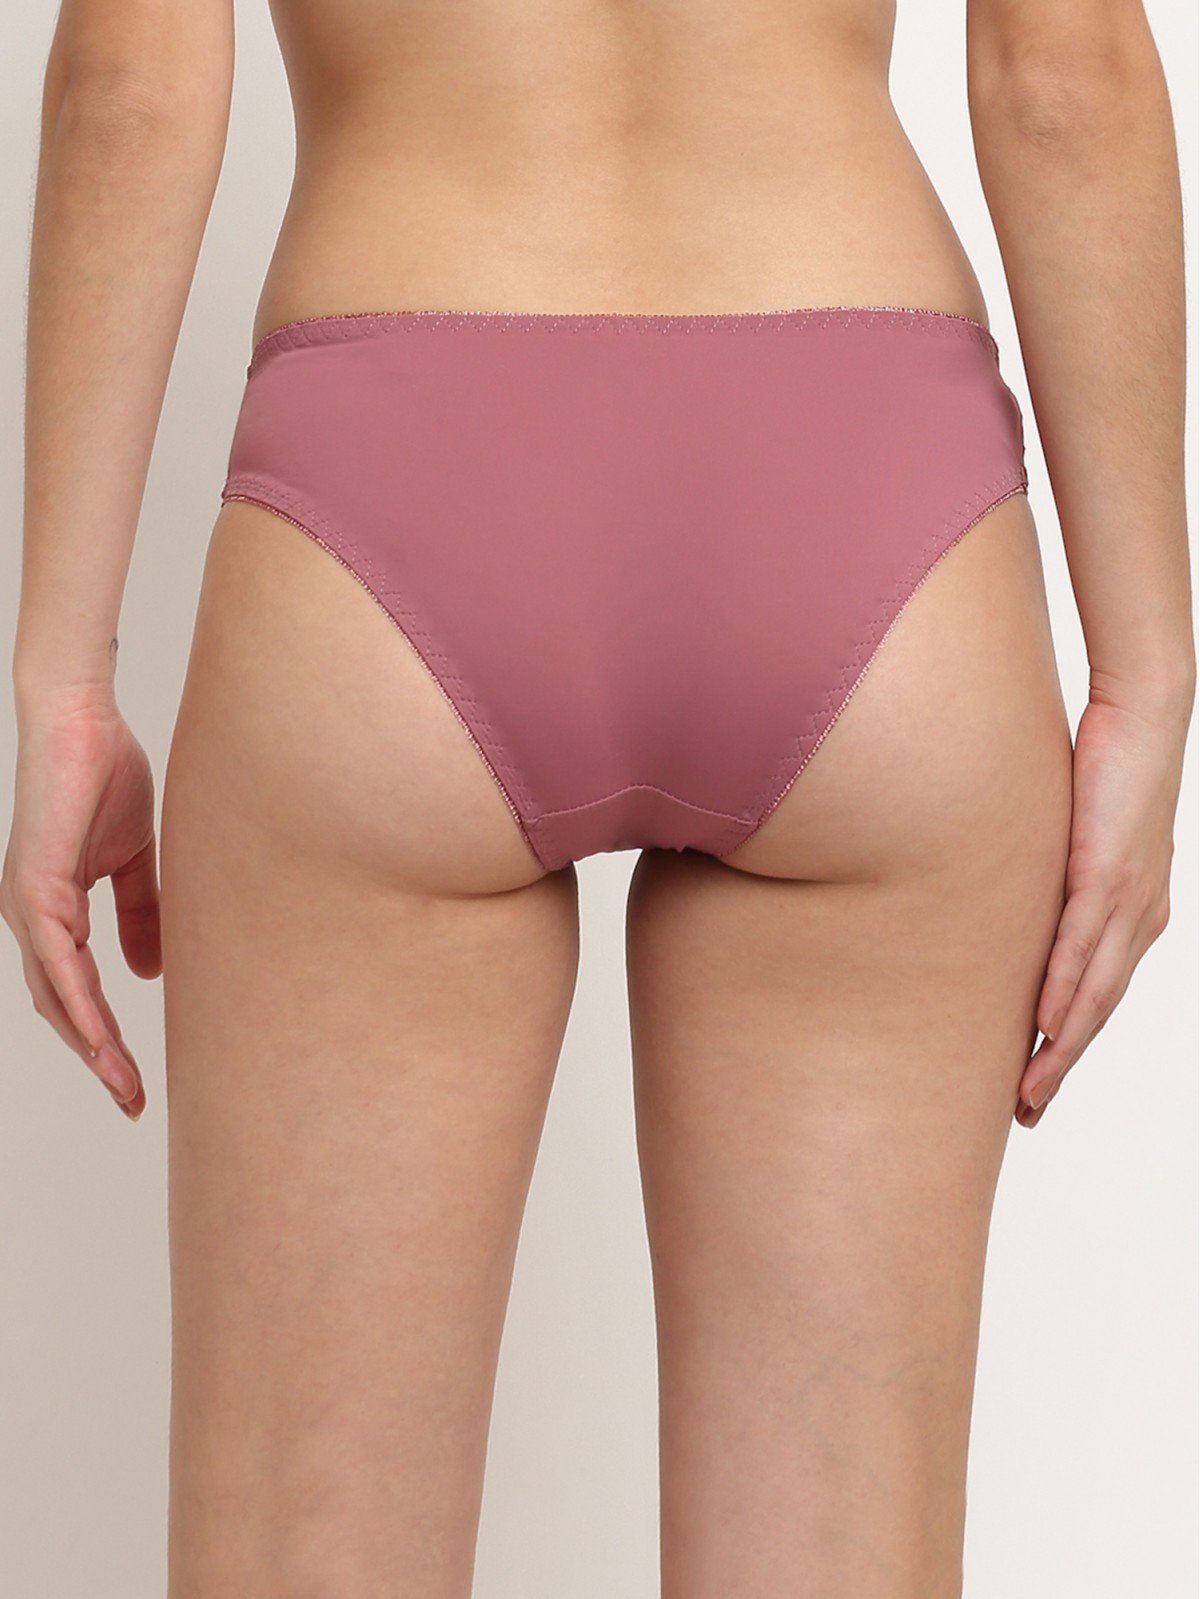 The Tempting Triangle Panty K1505P